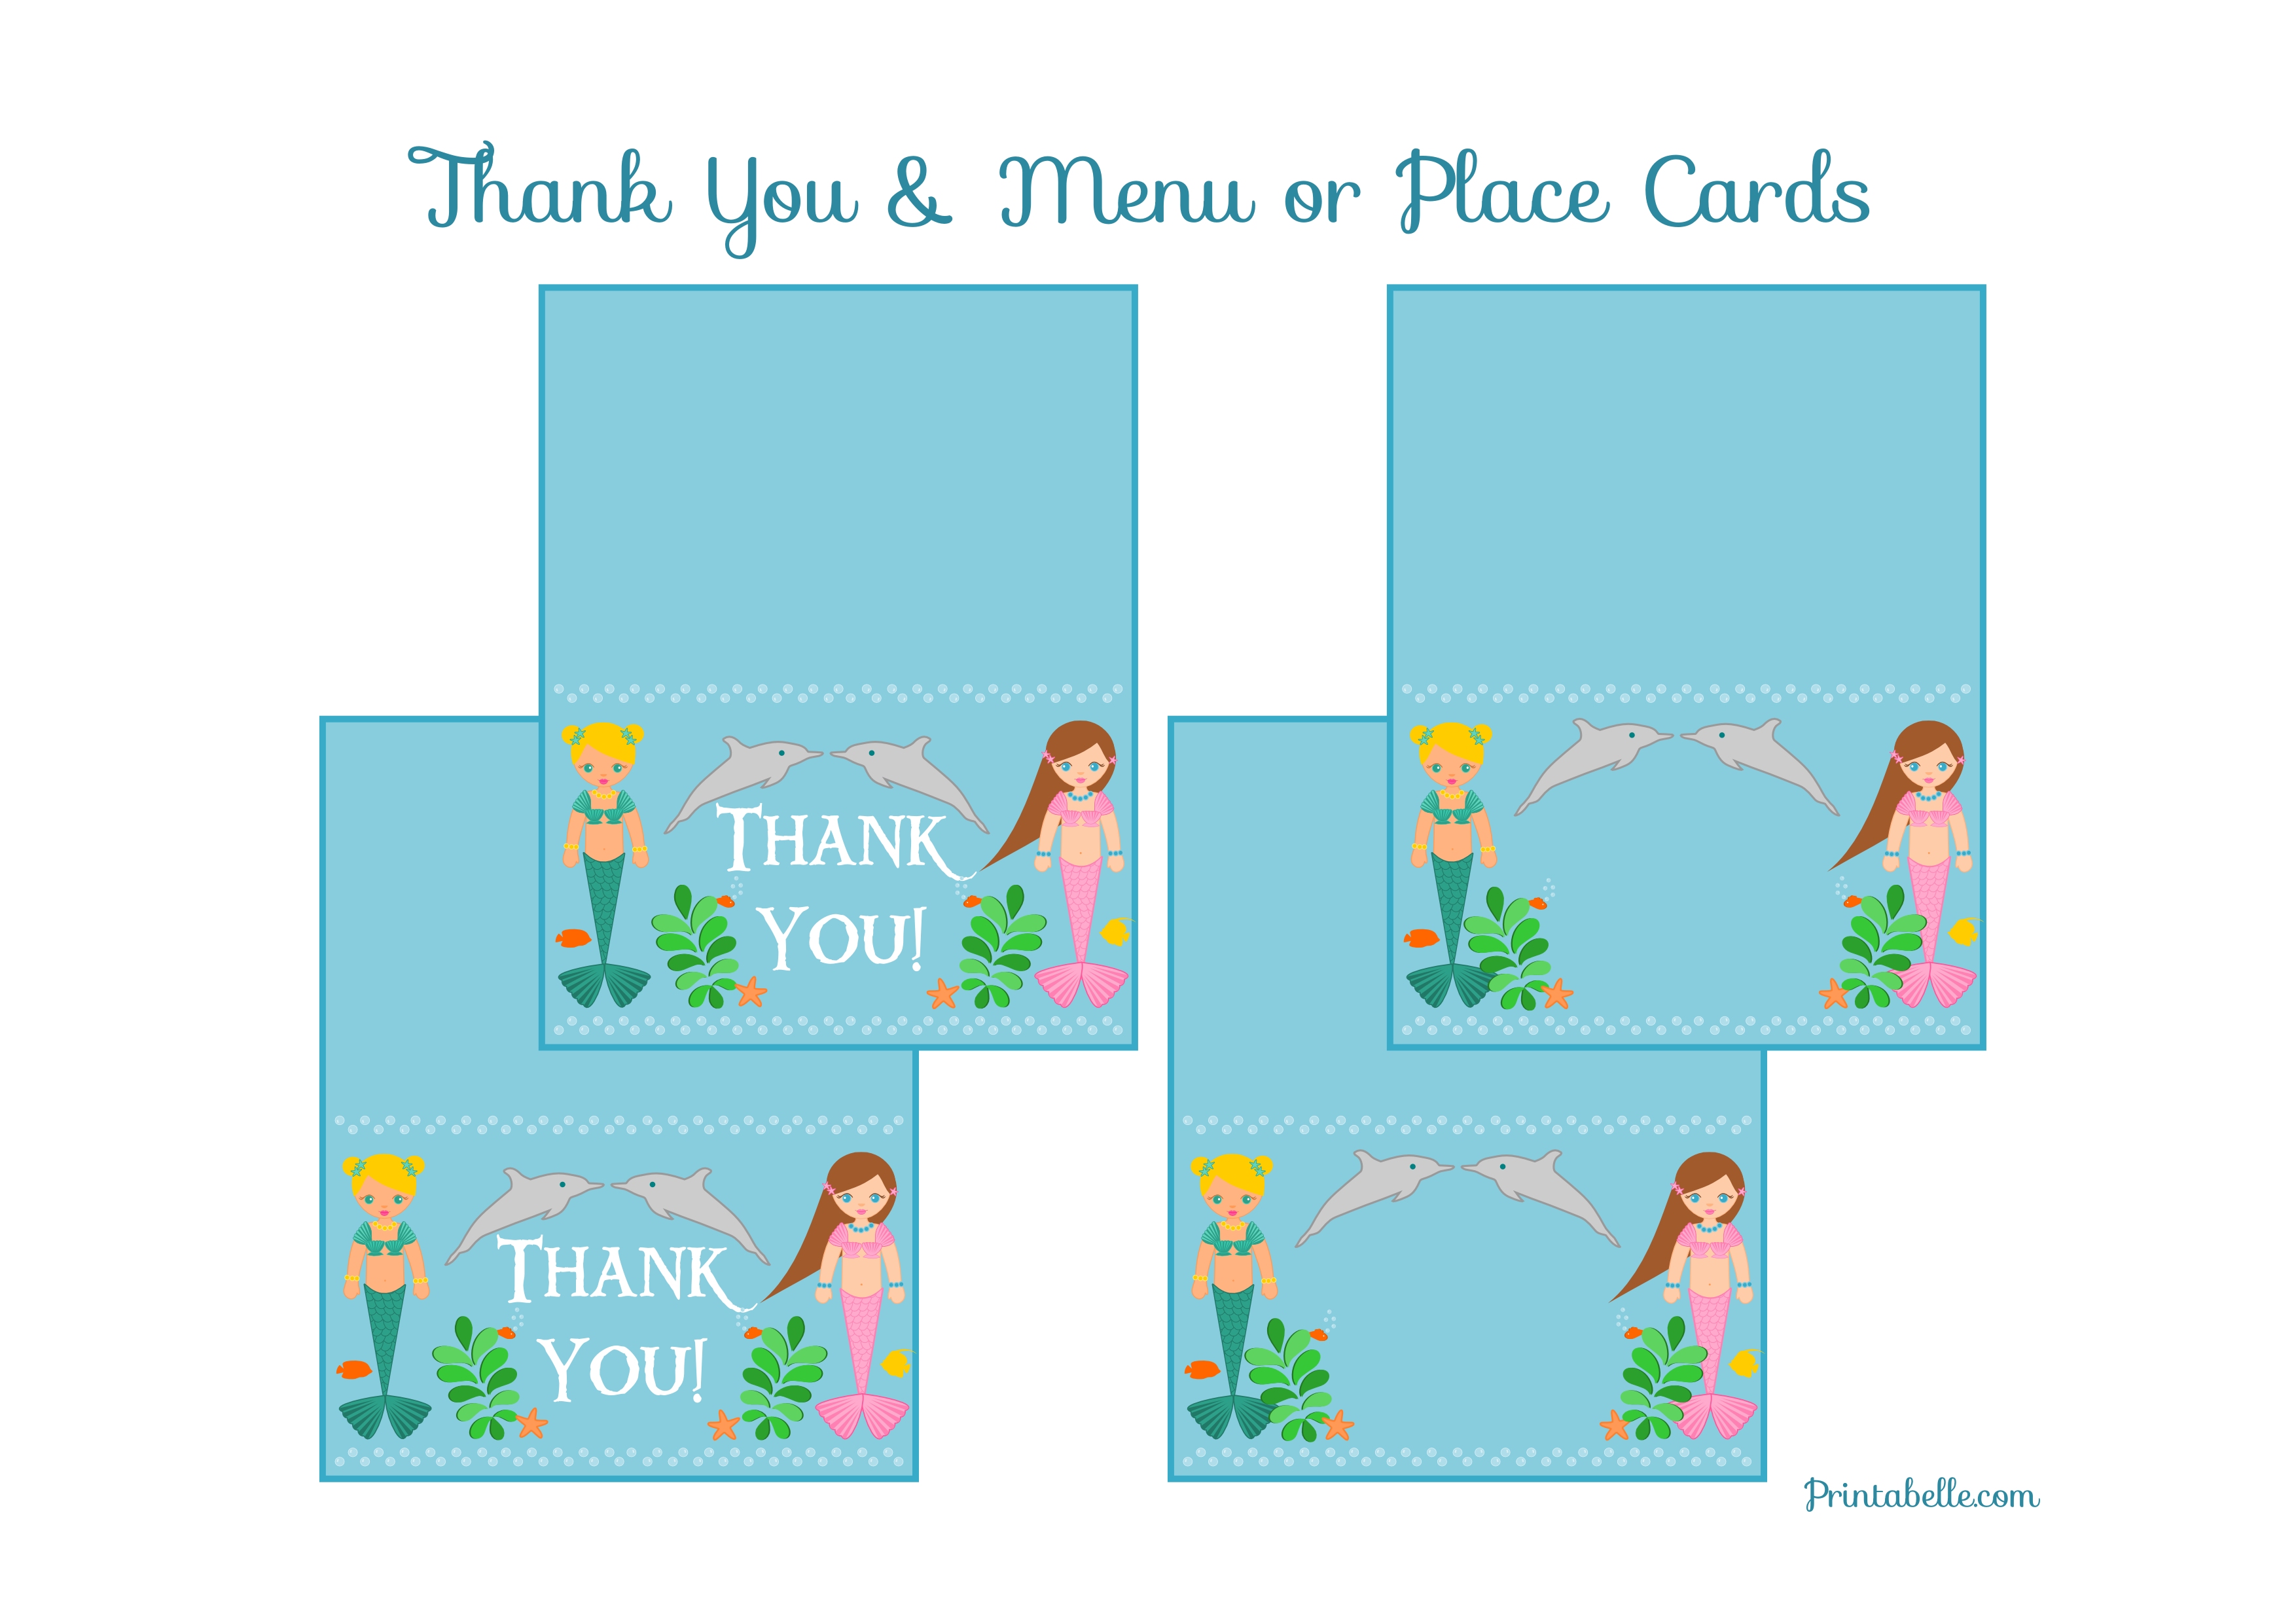 free-mermaid-birthday-party-printables-catch-my-party